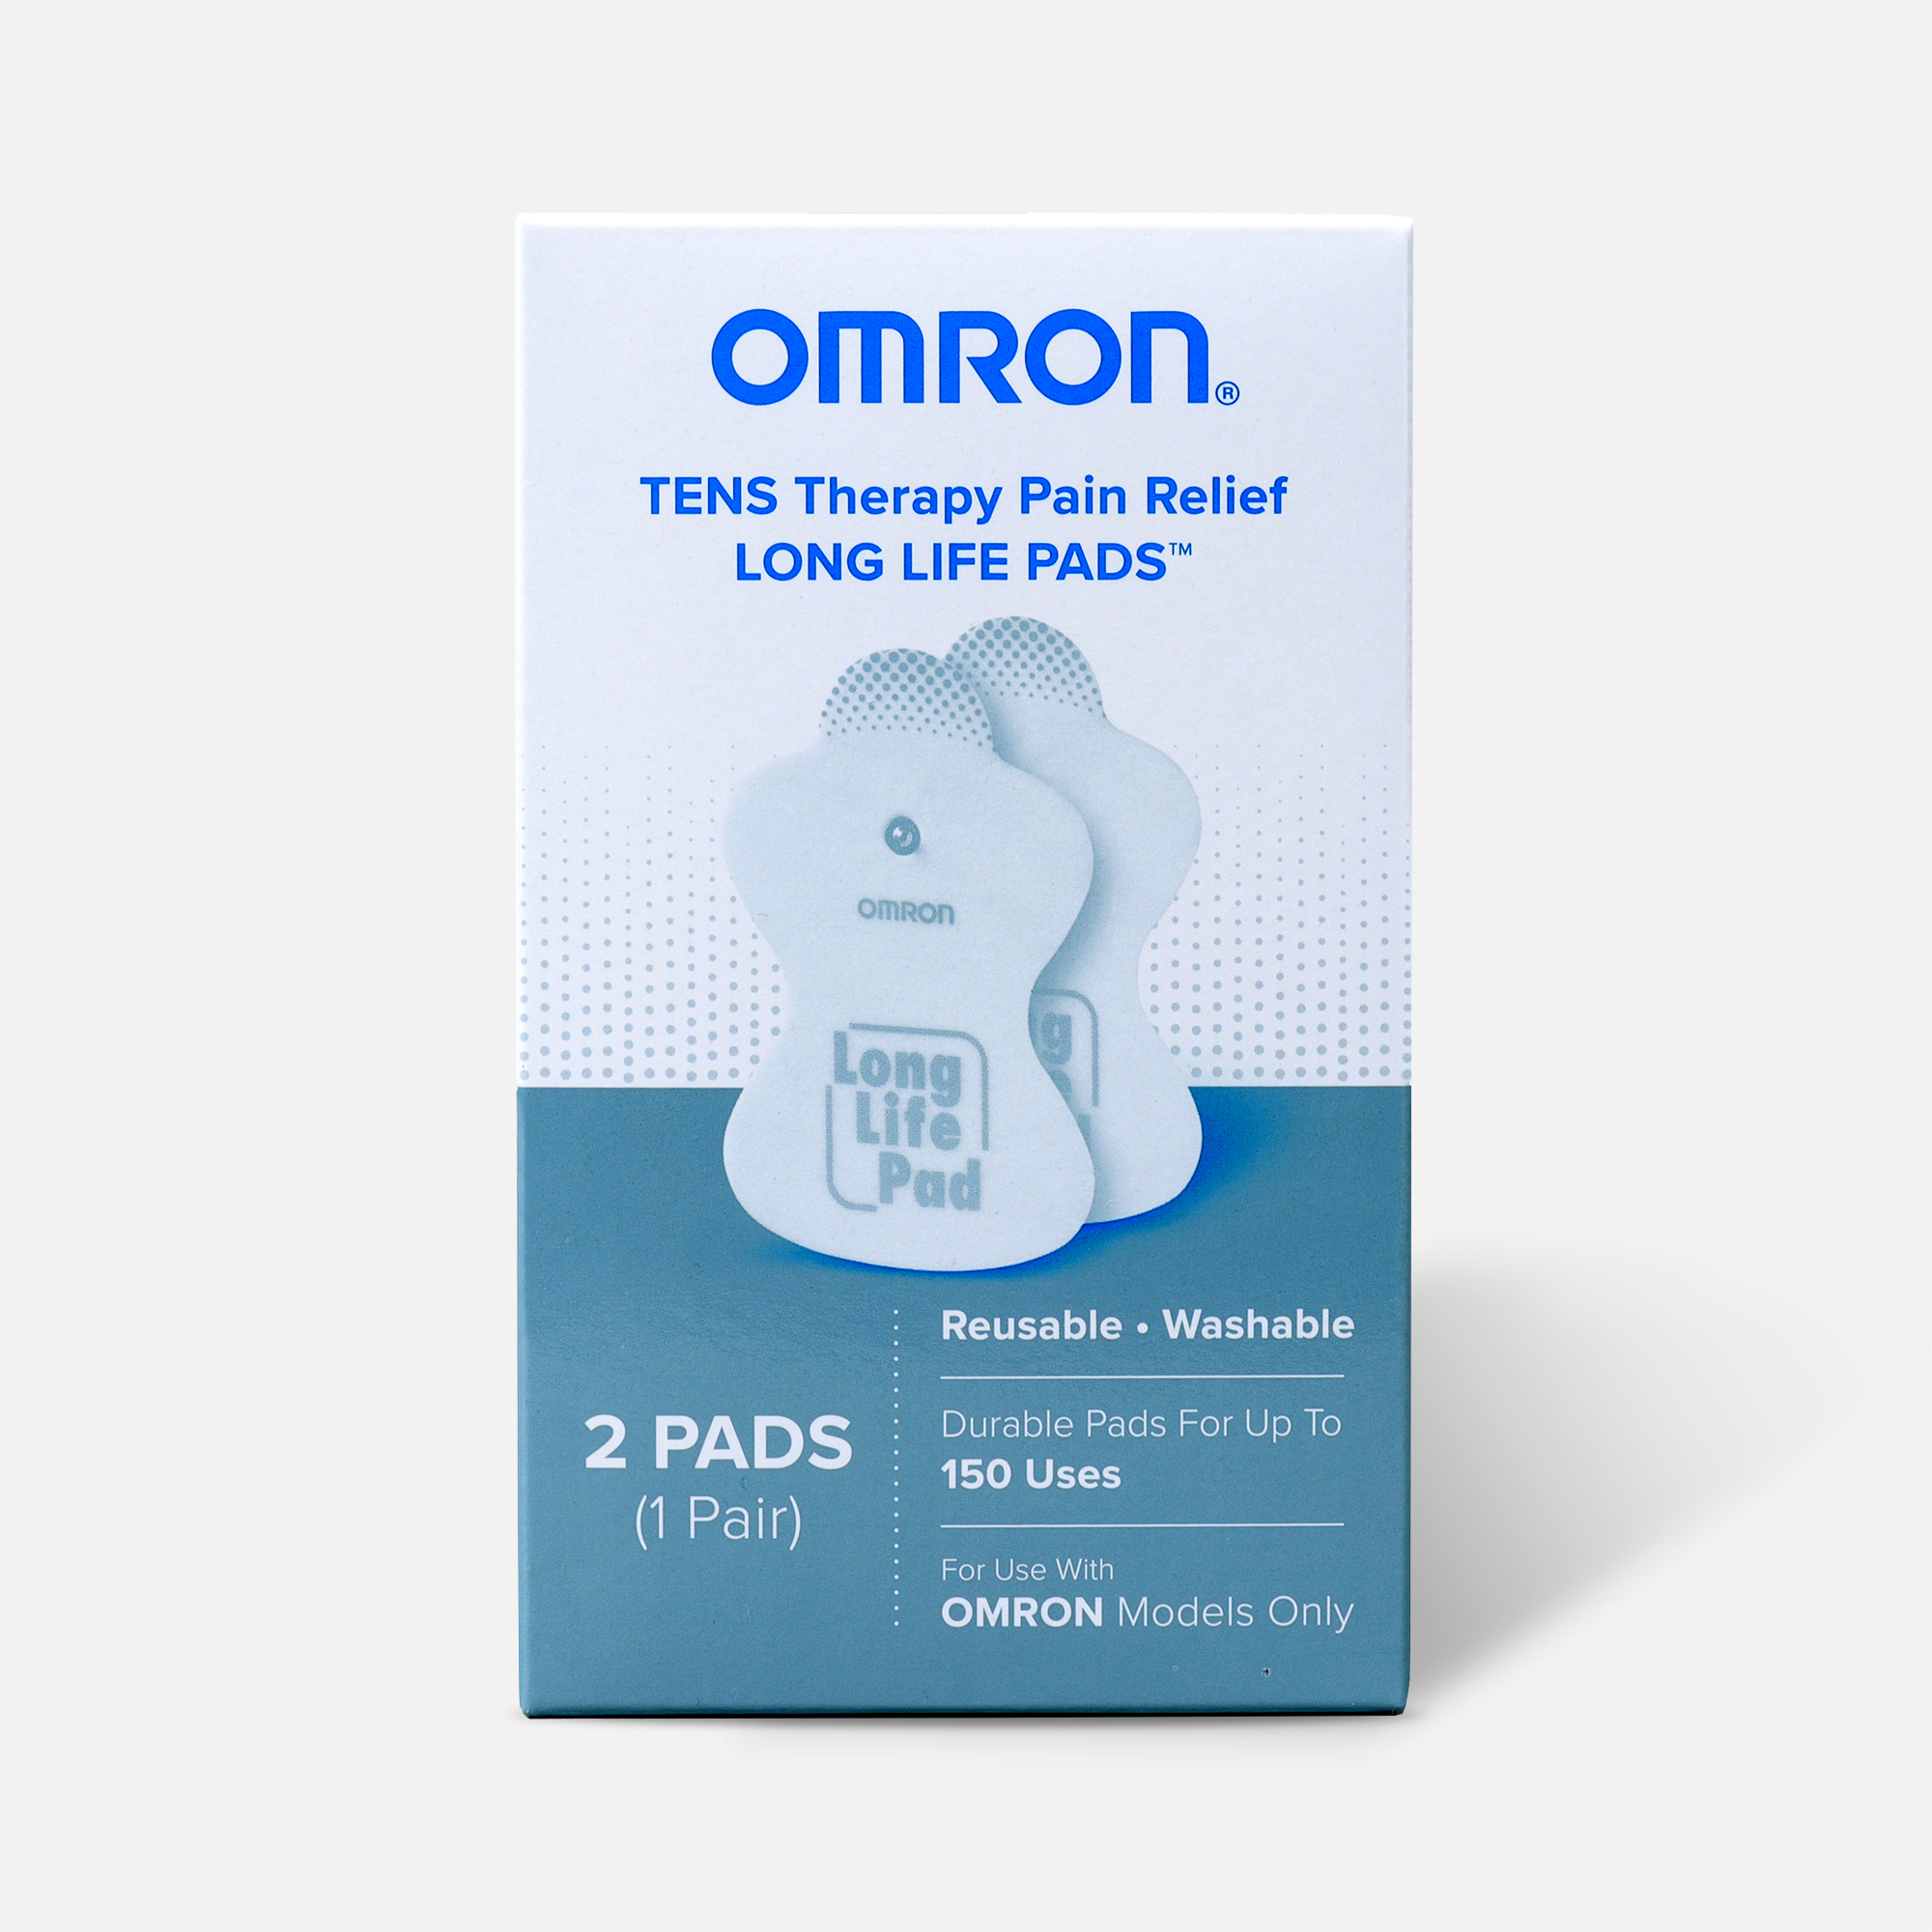 Omron Pm3030 Electrotherapy Pain Relief